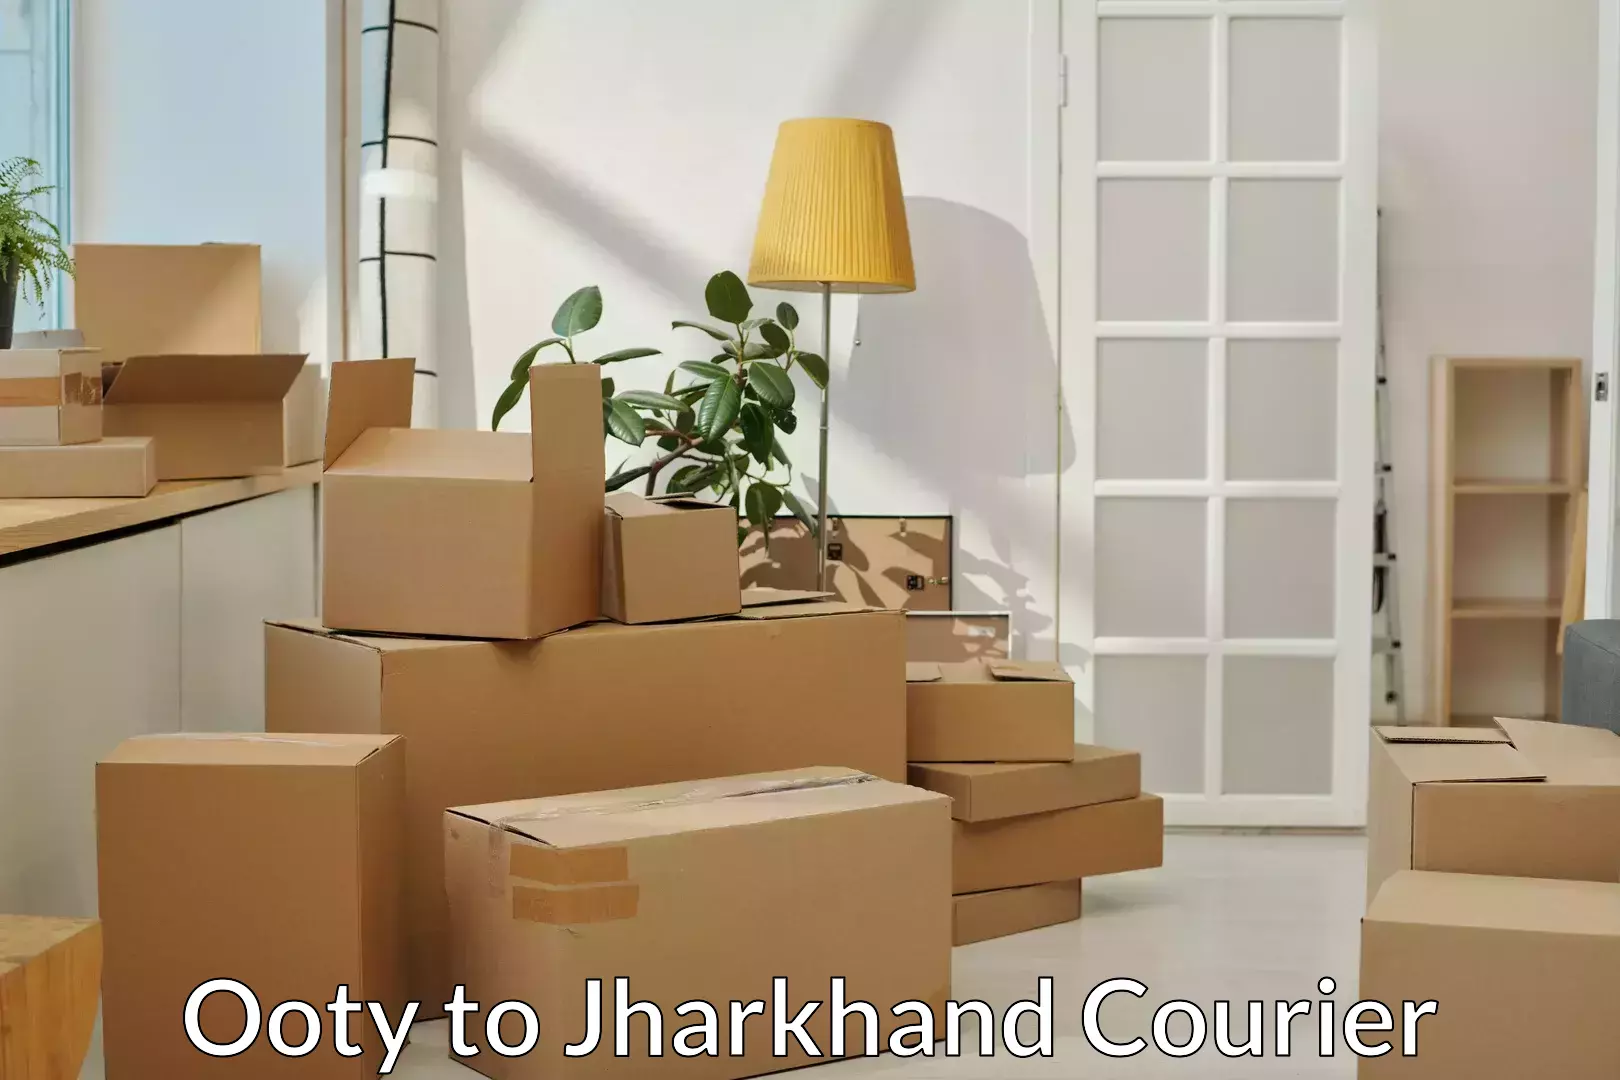 Furniture delivery service Ooty to Seraikella